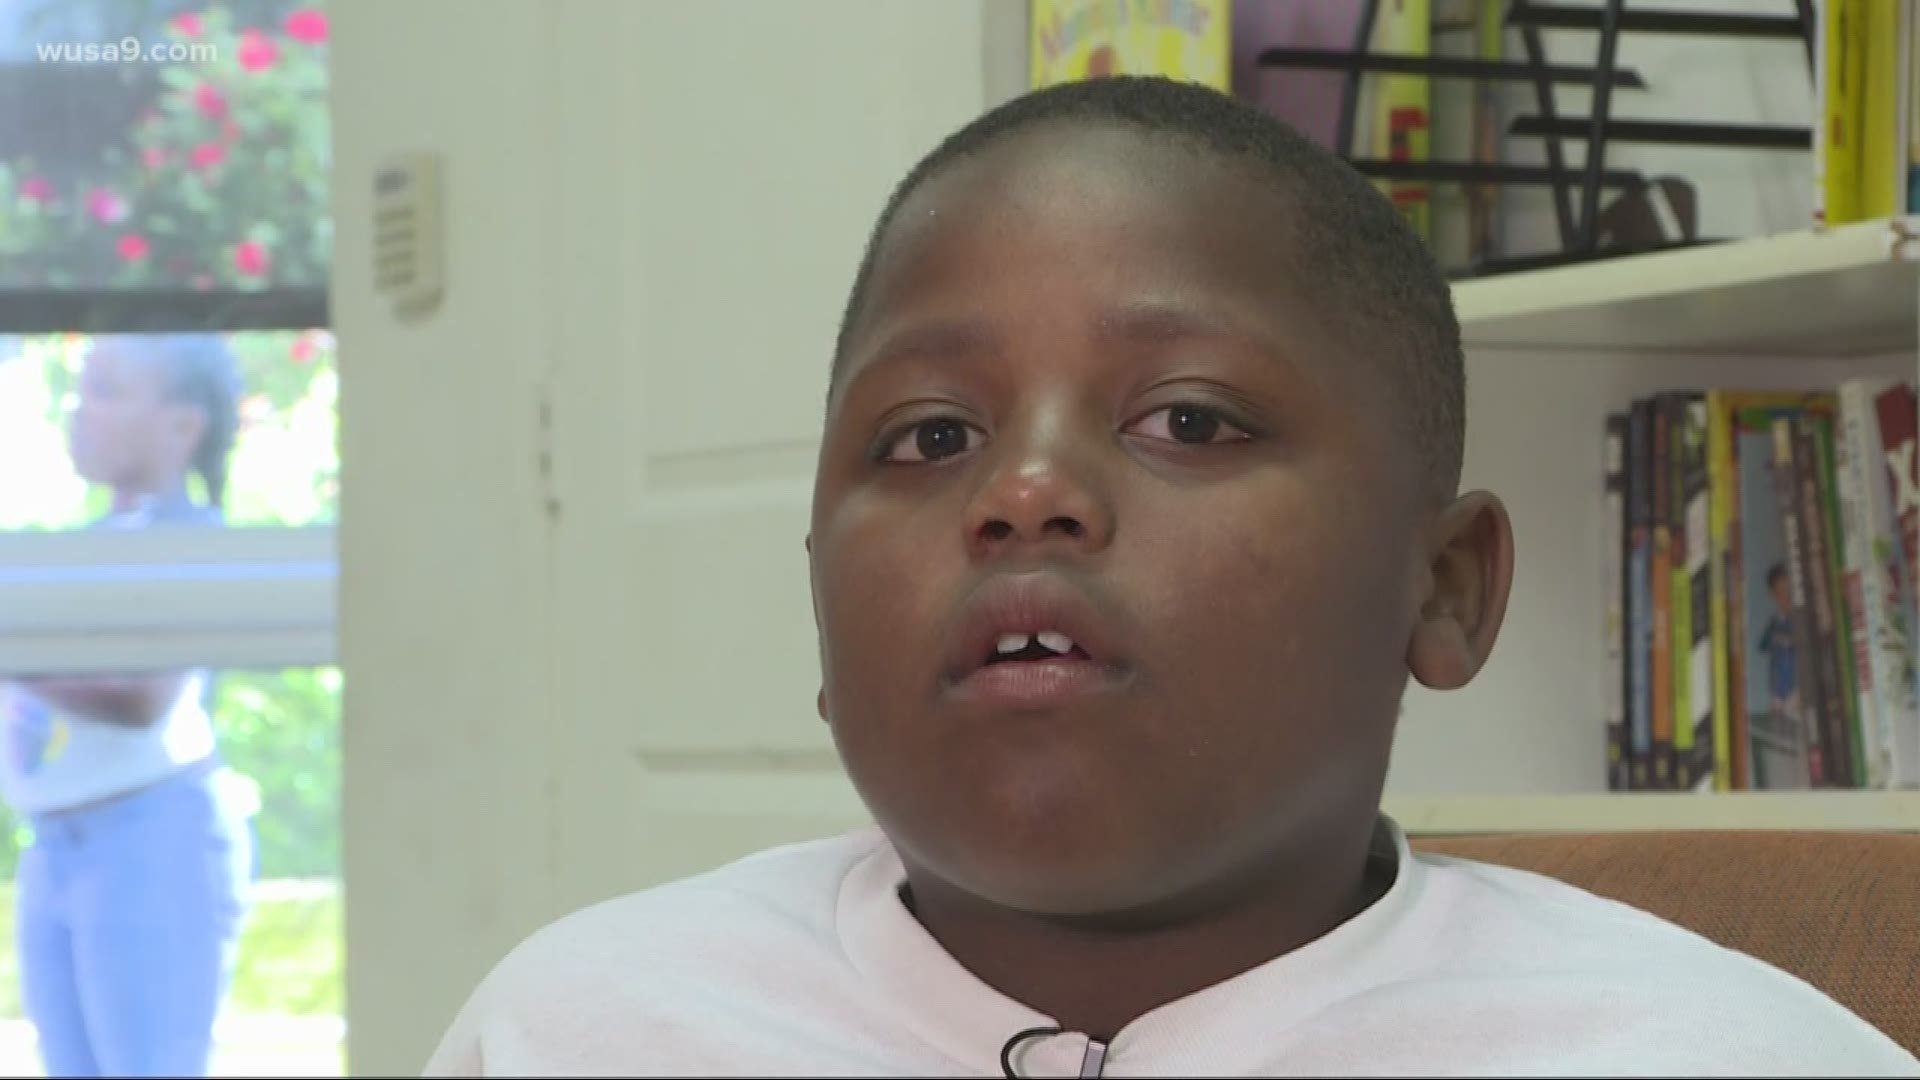 How do we stop the violence in our community?Some of DC's youngest minds are talking about it.